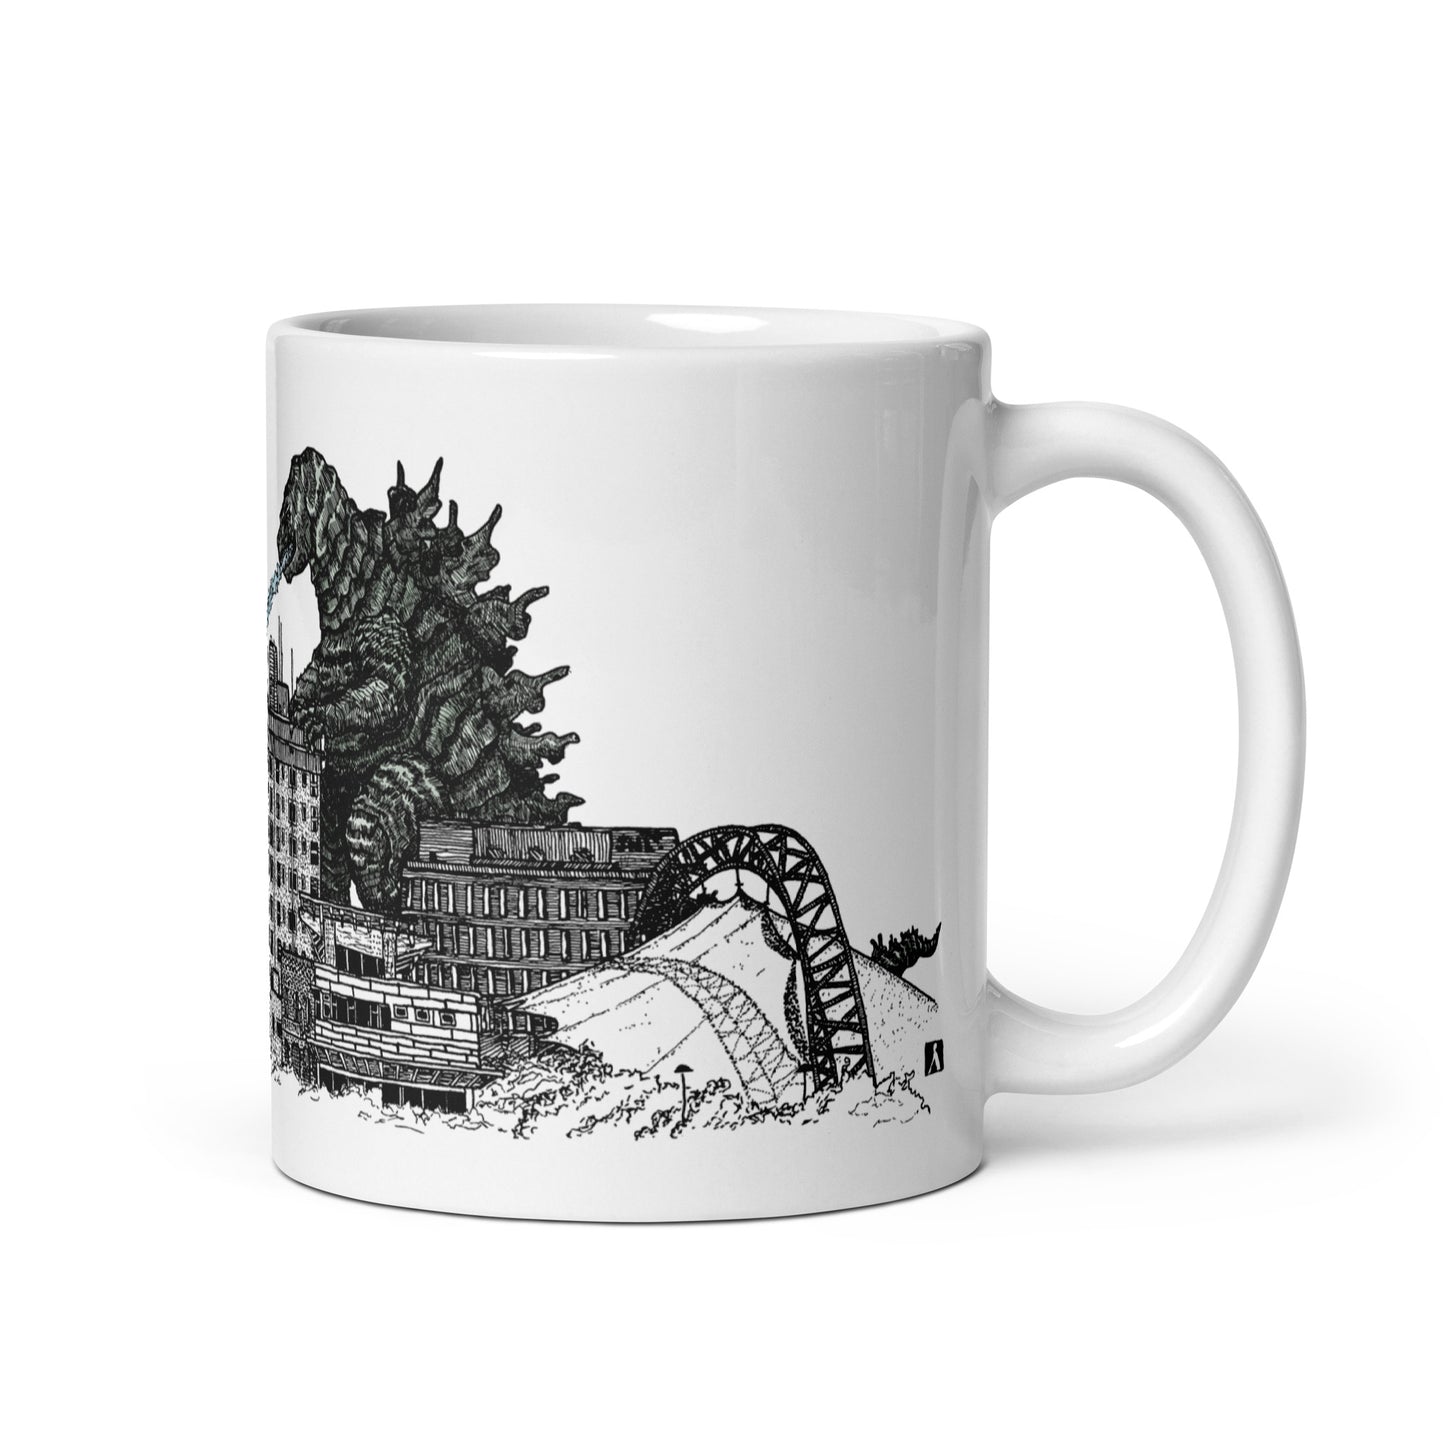 BellavanceInk: Coffee Mug With Pen & Ink Watercolor Sketch Of Giant Monster Attacking The Abandoned Landmark Hotel In Charlottesville